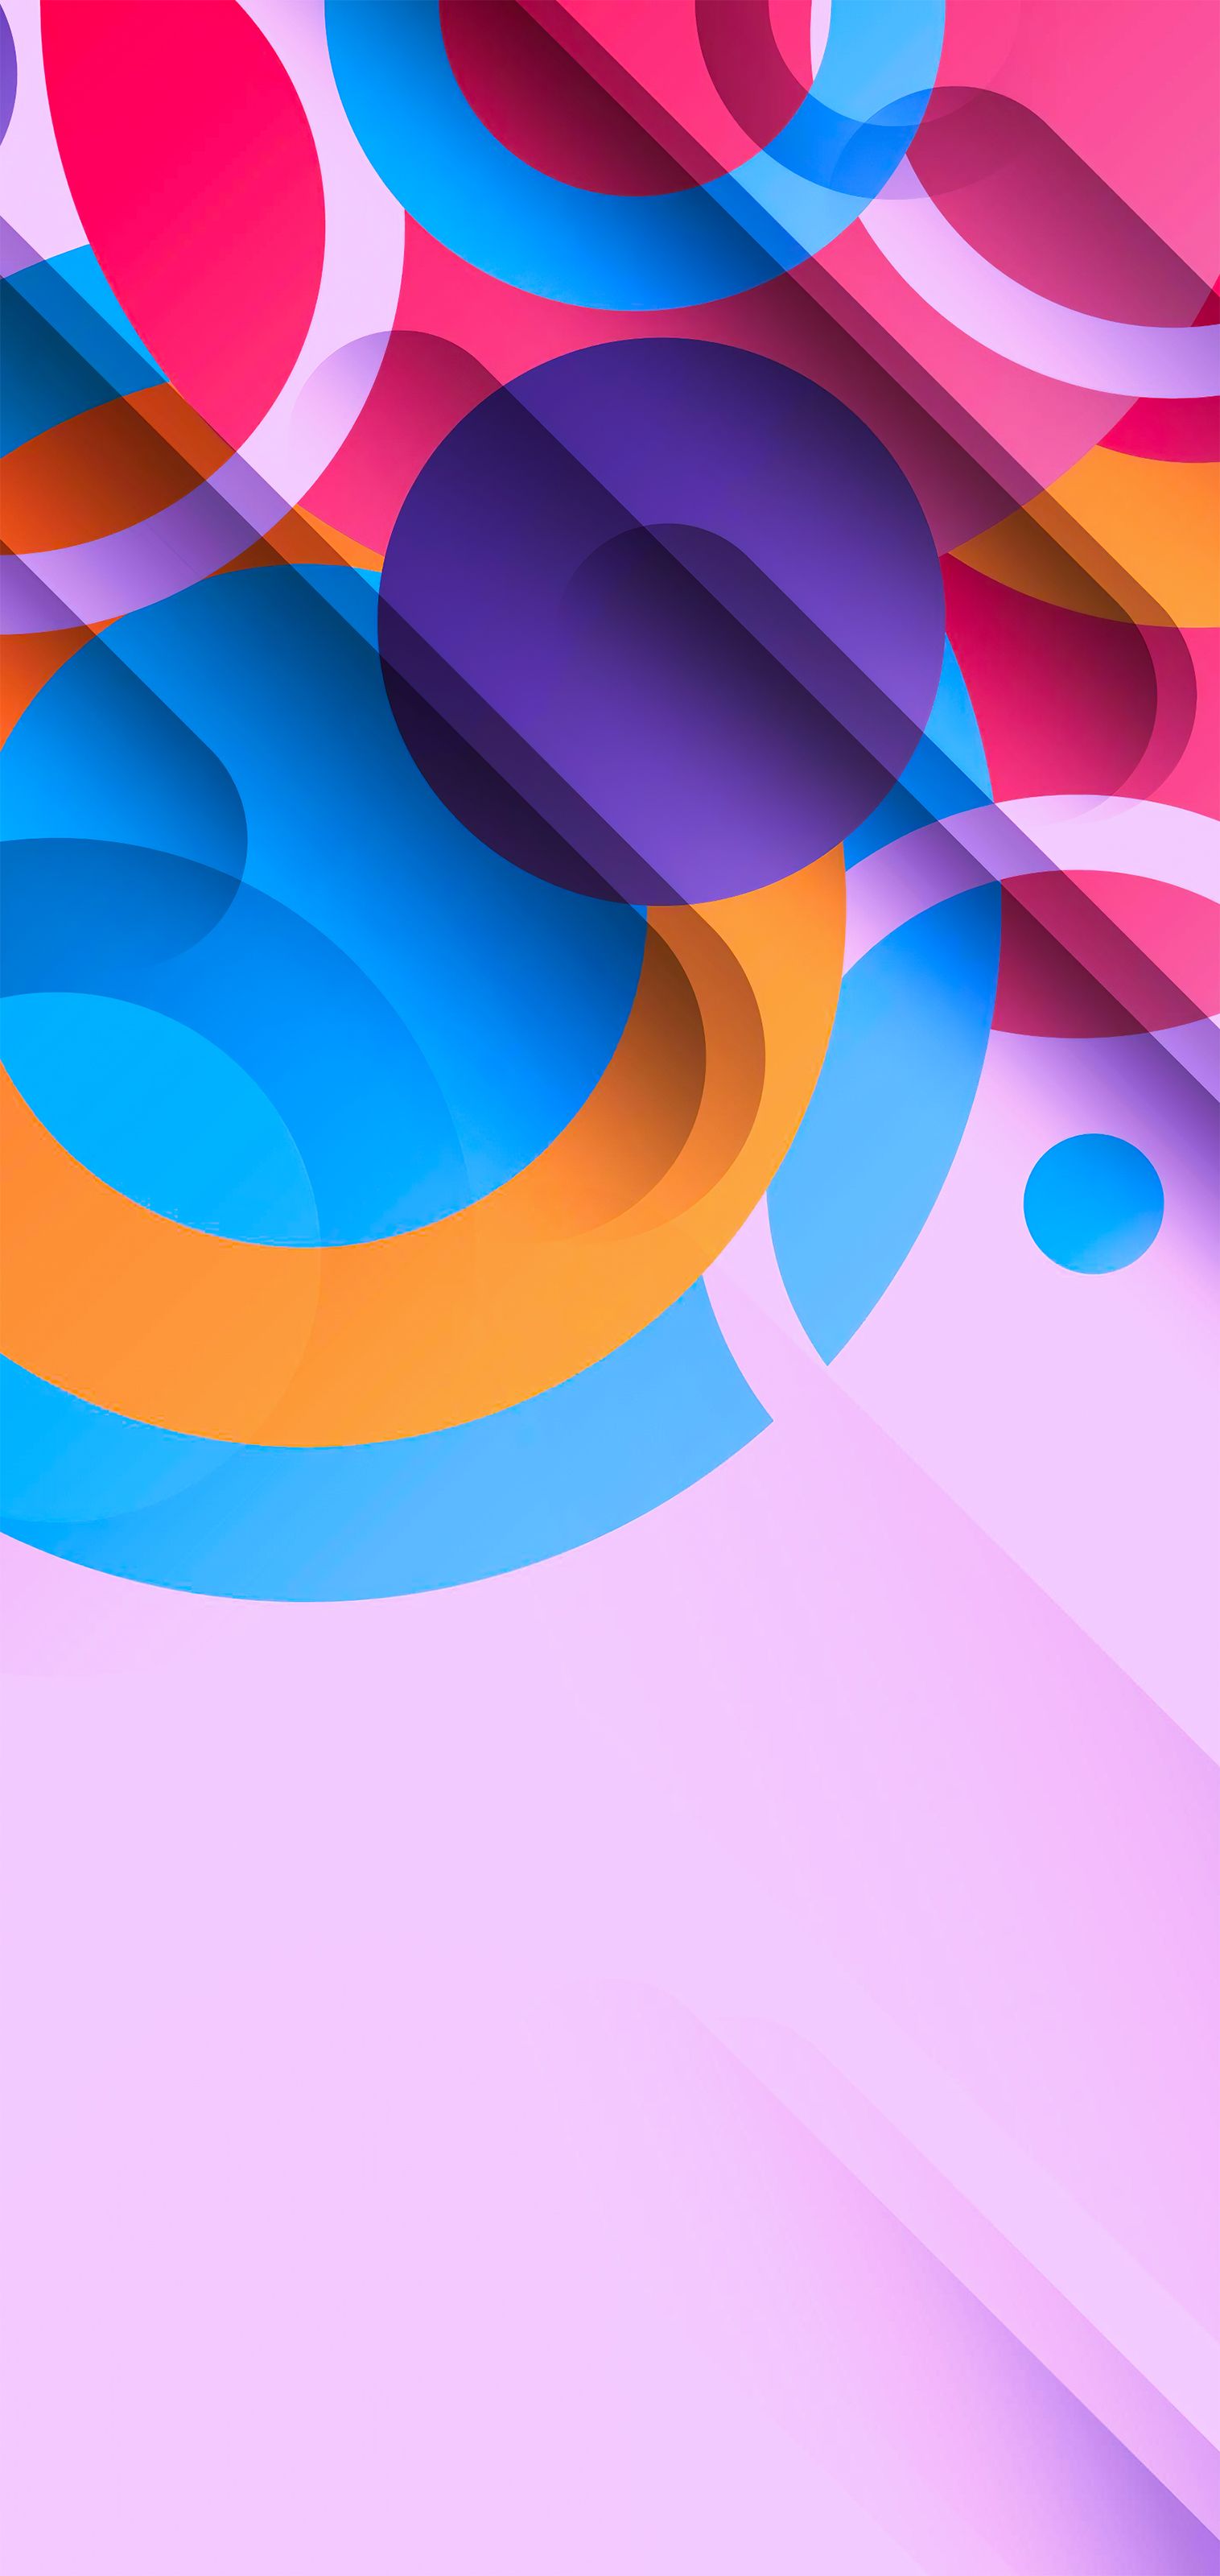 Abstract wallpaper with geometric colors and shapes for iPhone